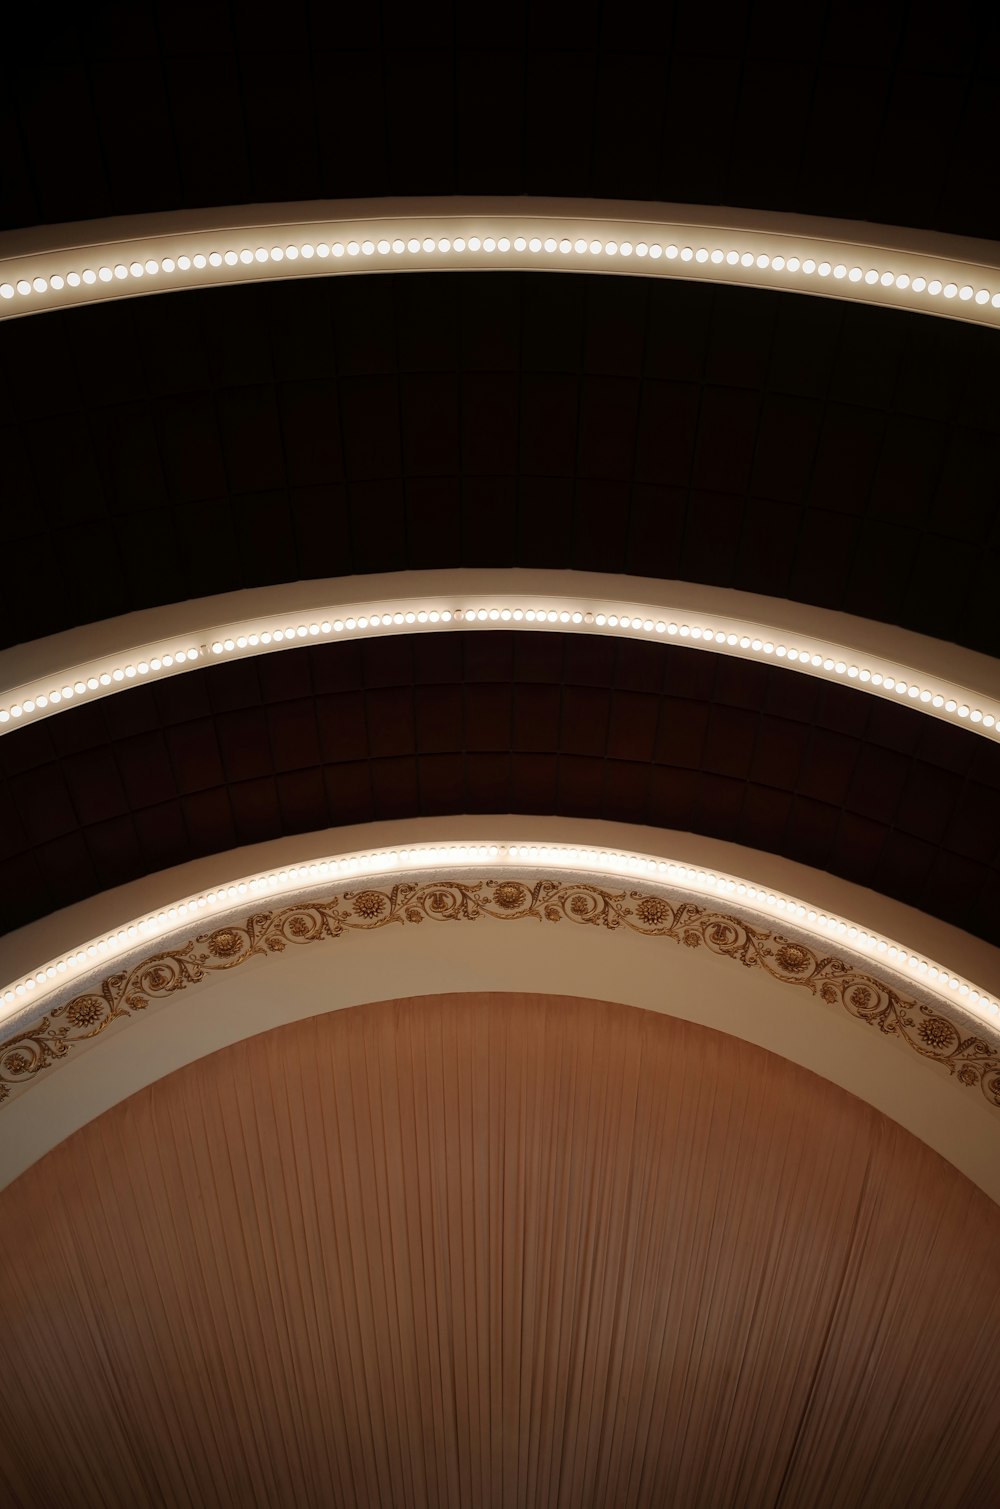 a view of the ceiling of a building at night